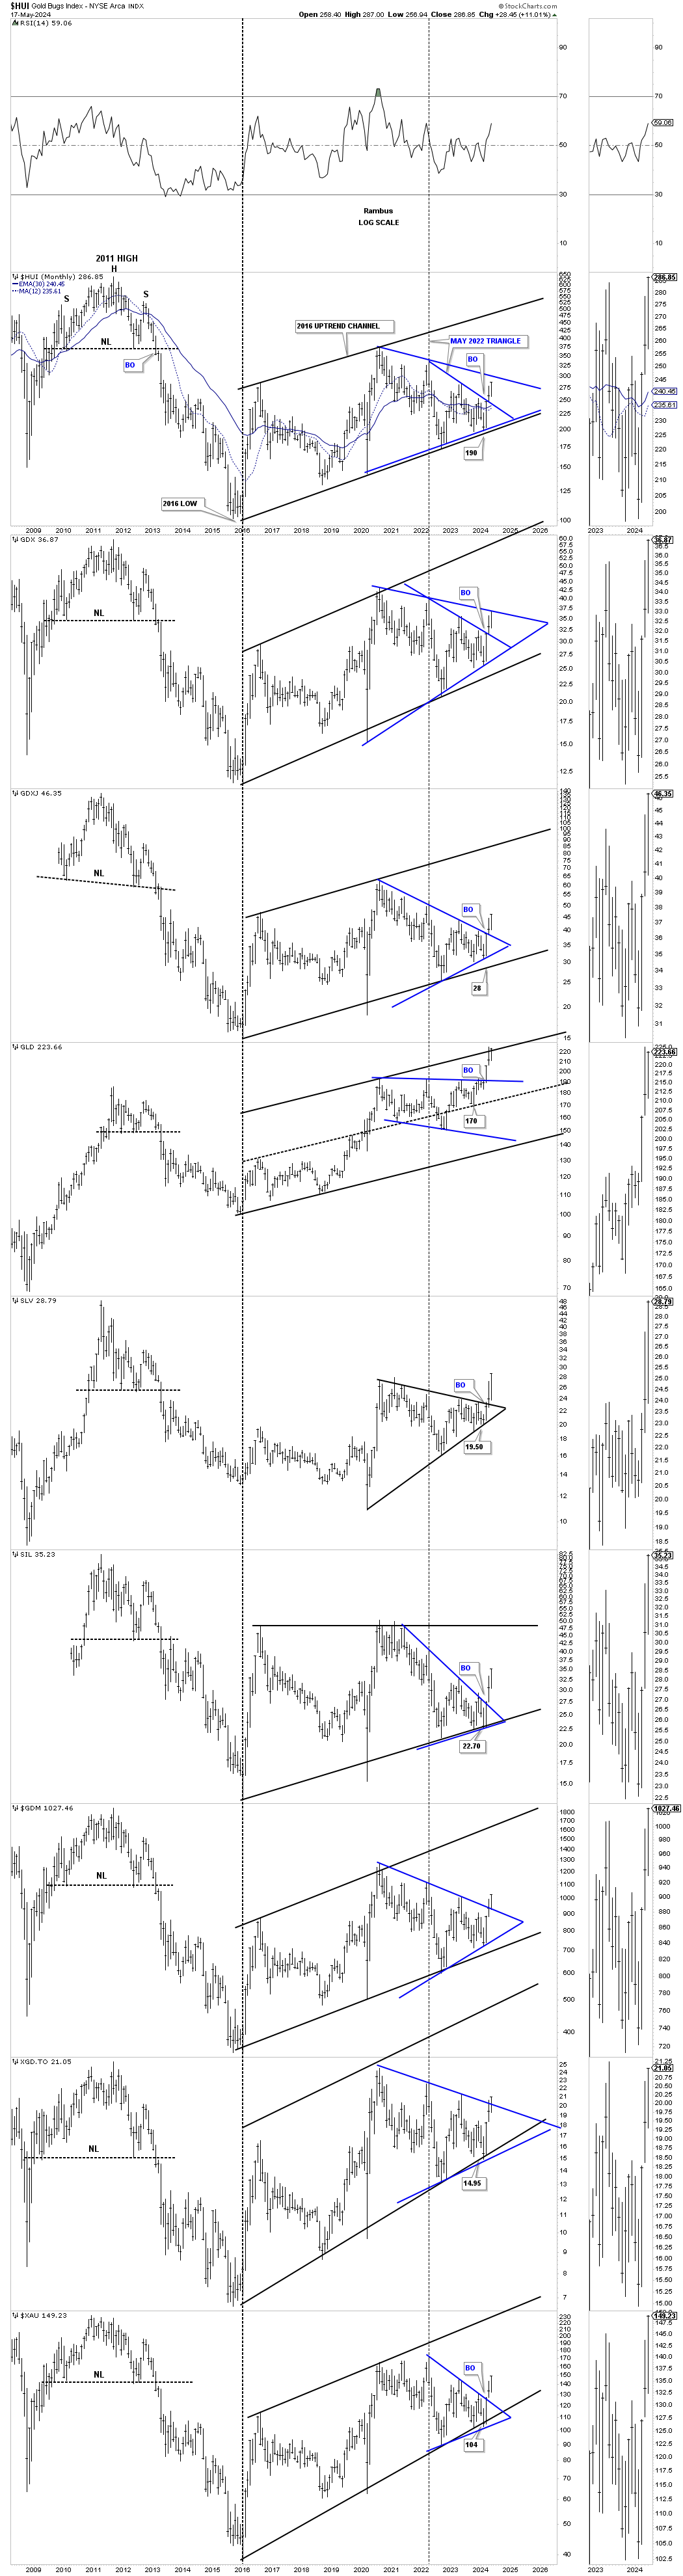 HUI-Monthly Chart